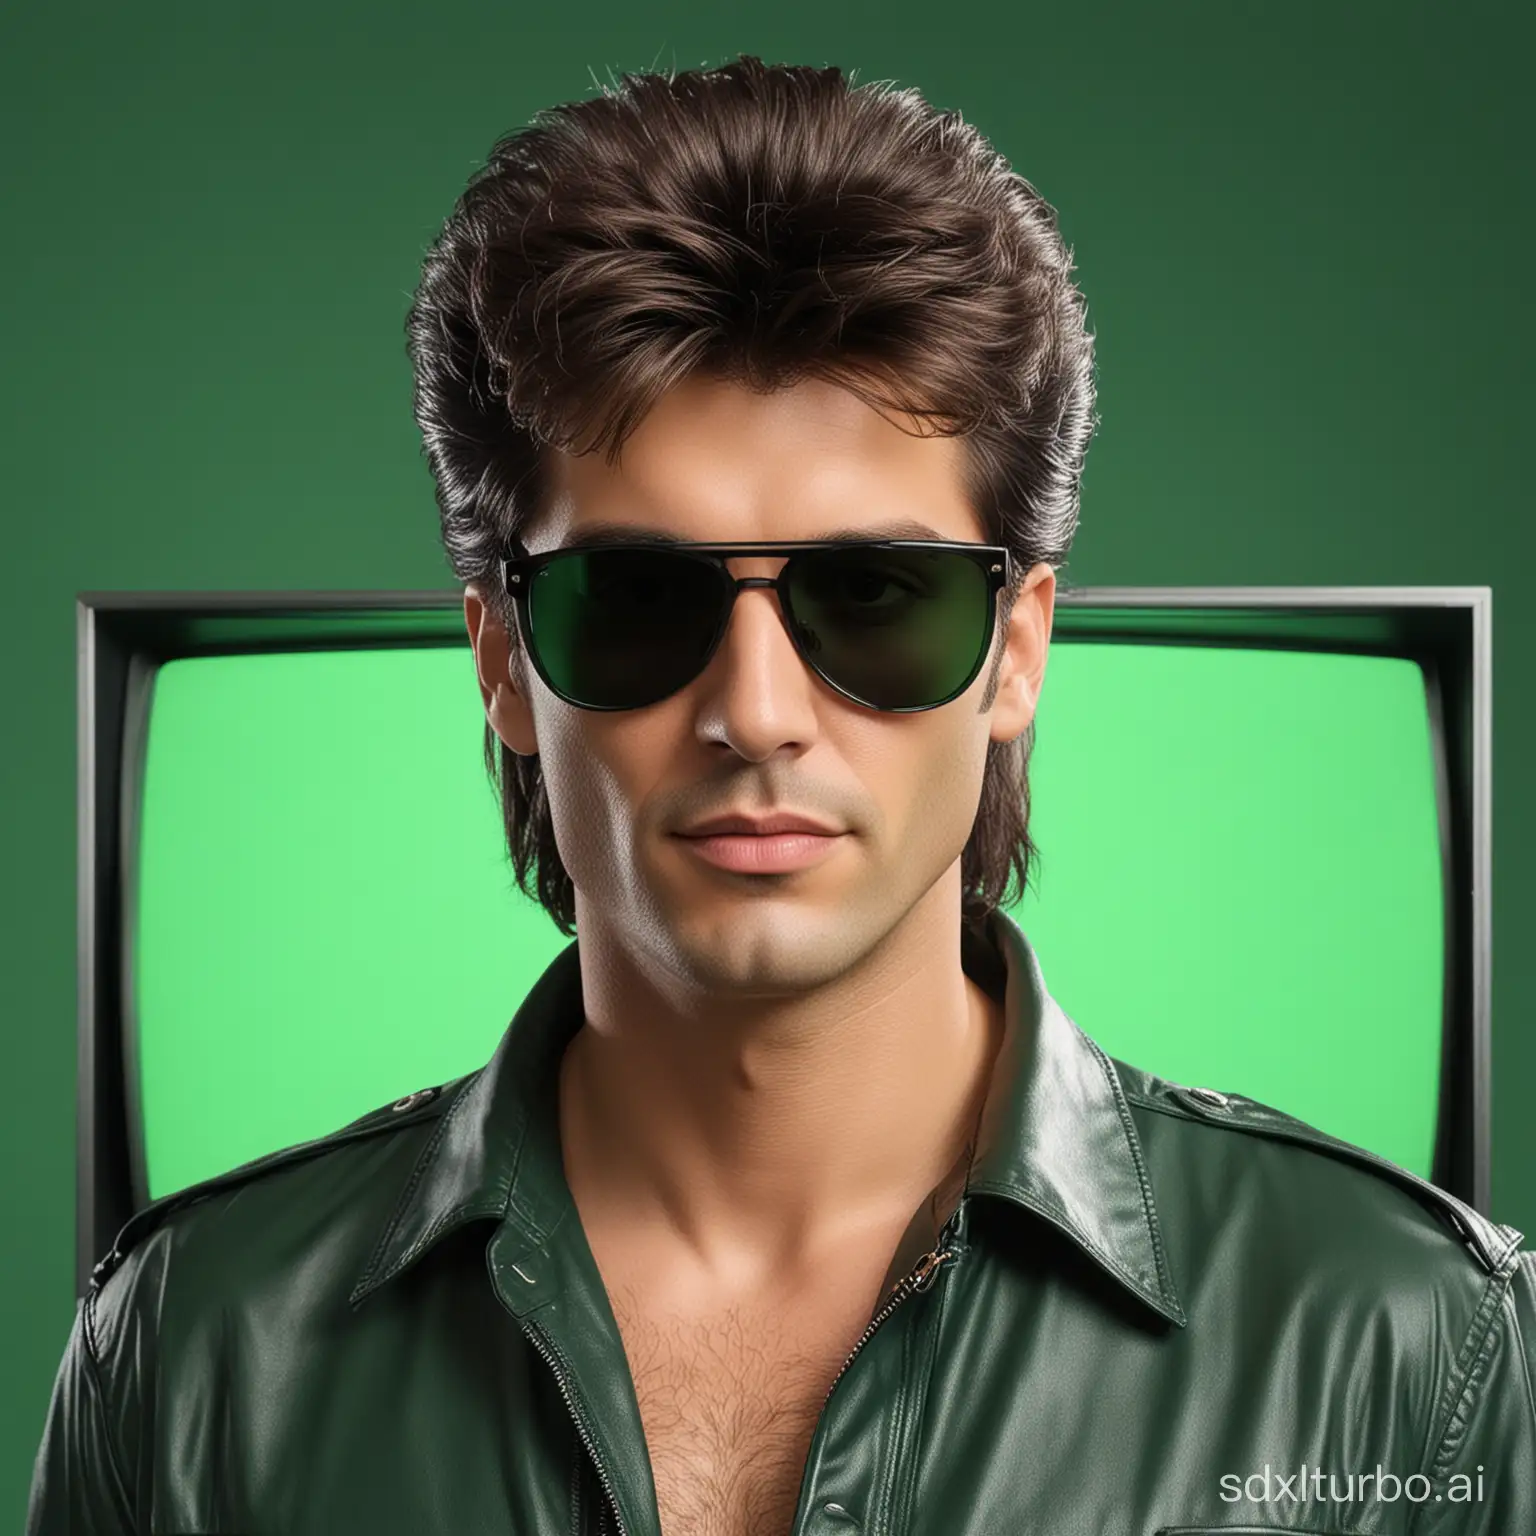 80s-TV-Presenter-with-Pompadour-and-Dark-Sunglasses-on-Green-Chrome-Screen